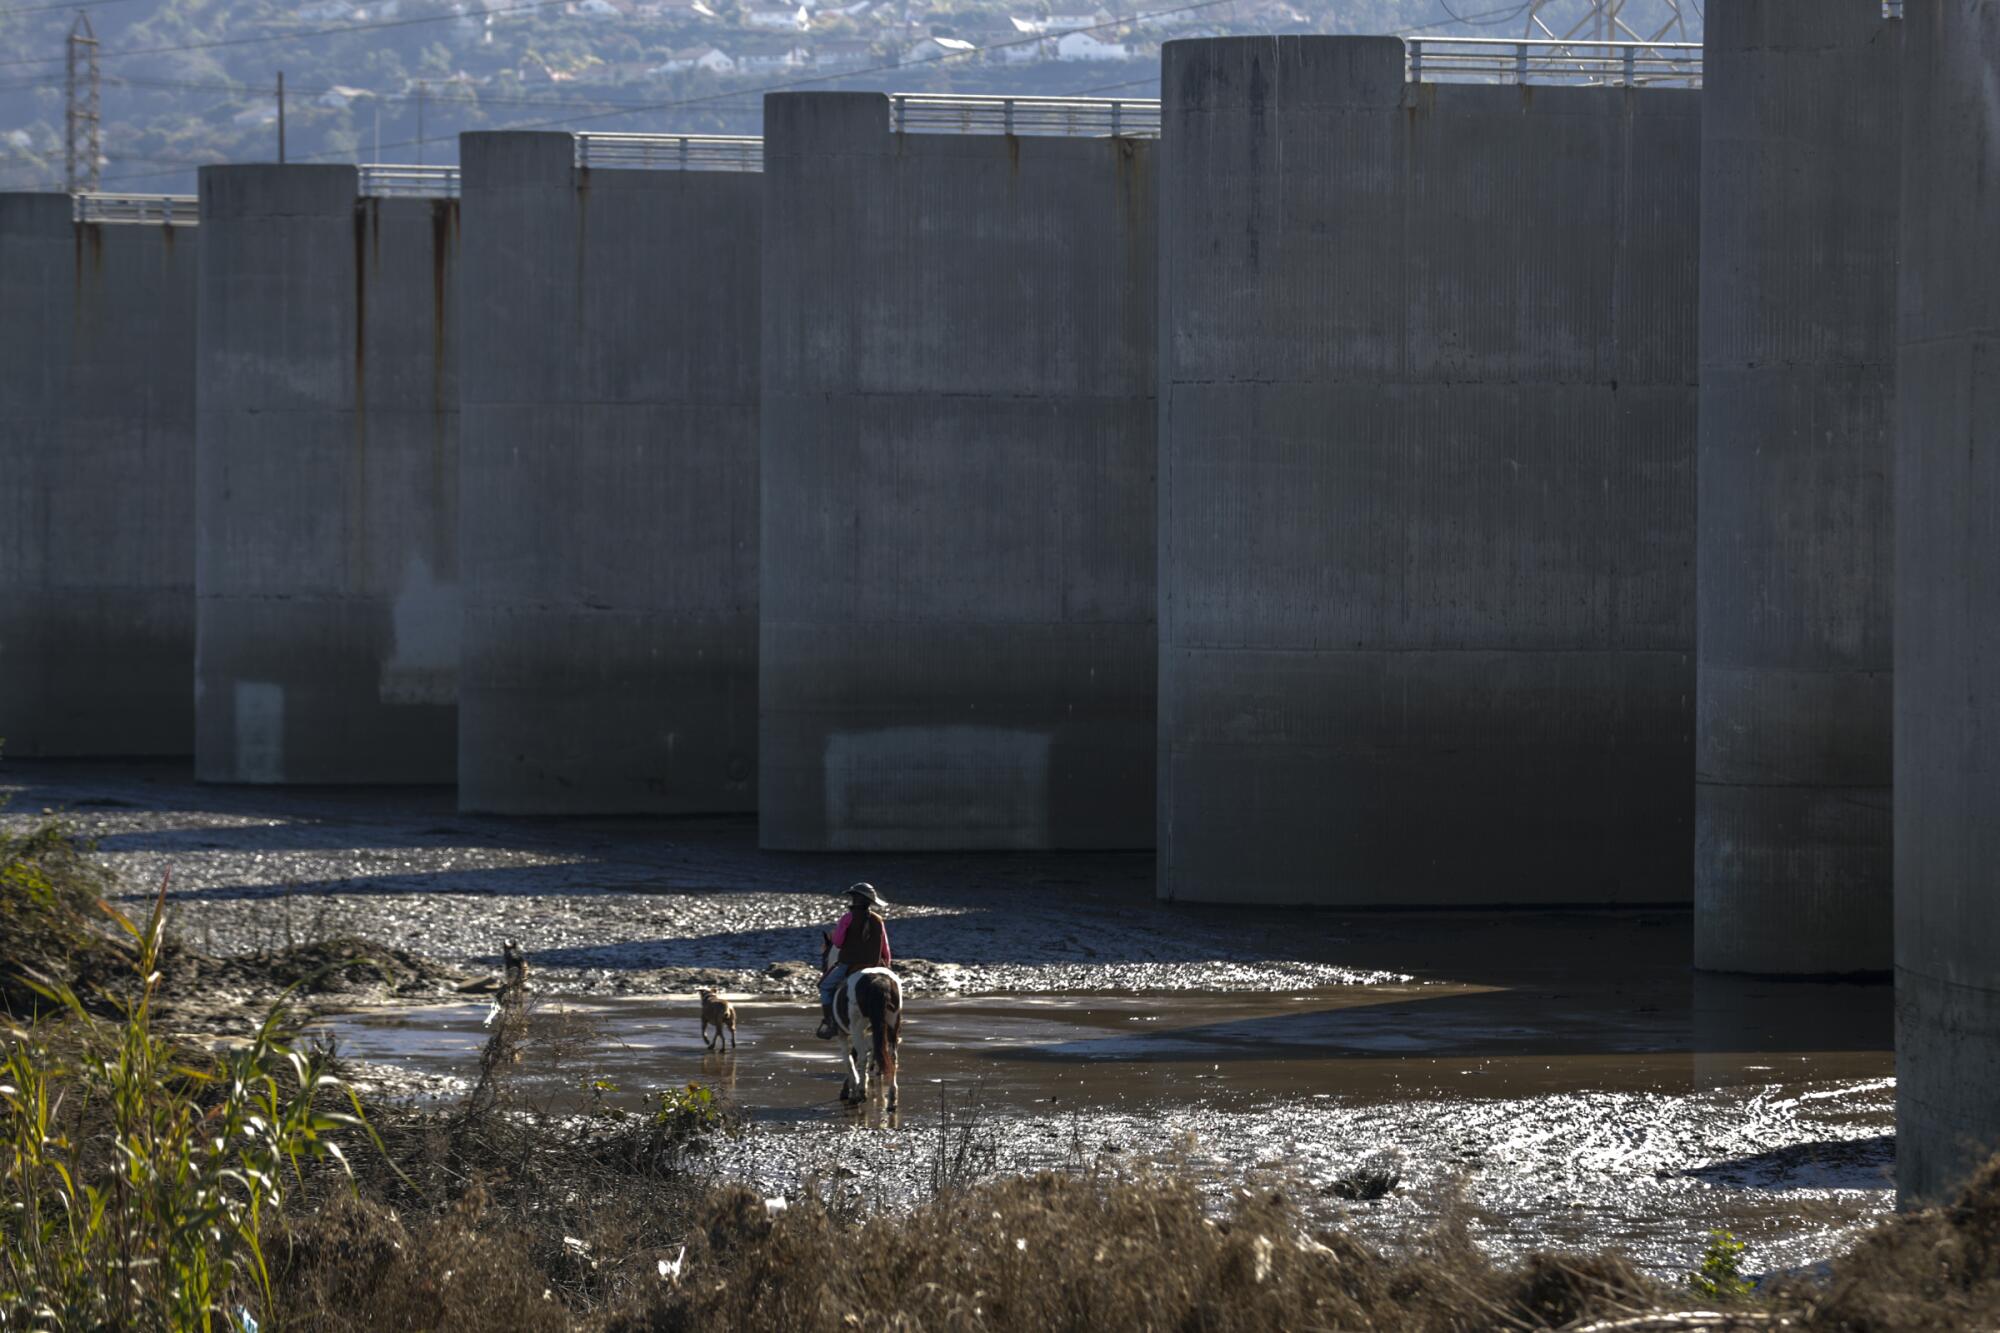 The U.S. Army Corps of Engineers has determined that the aging Whittier Narrows Dam could fail